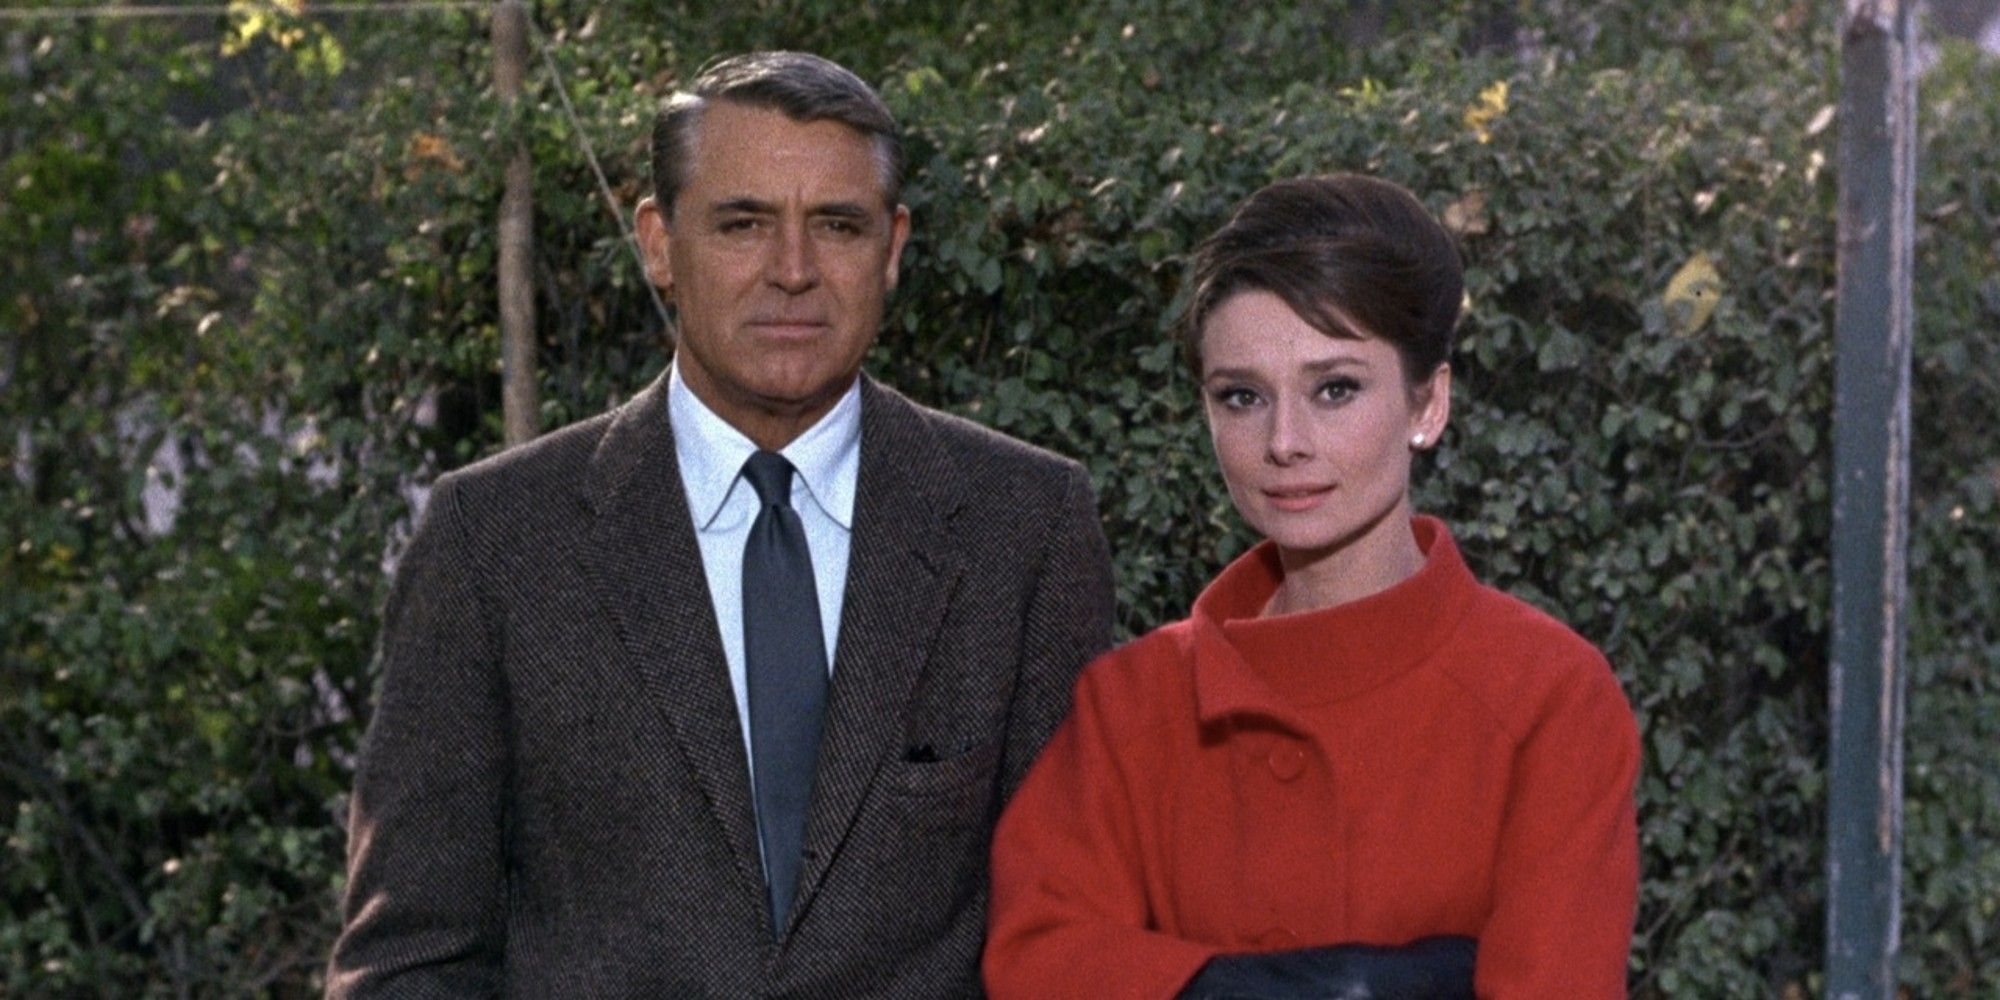 Audrey Hepburn and Cary Grant in 'Charade'